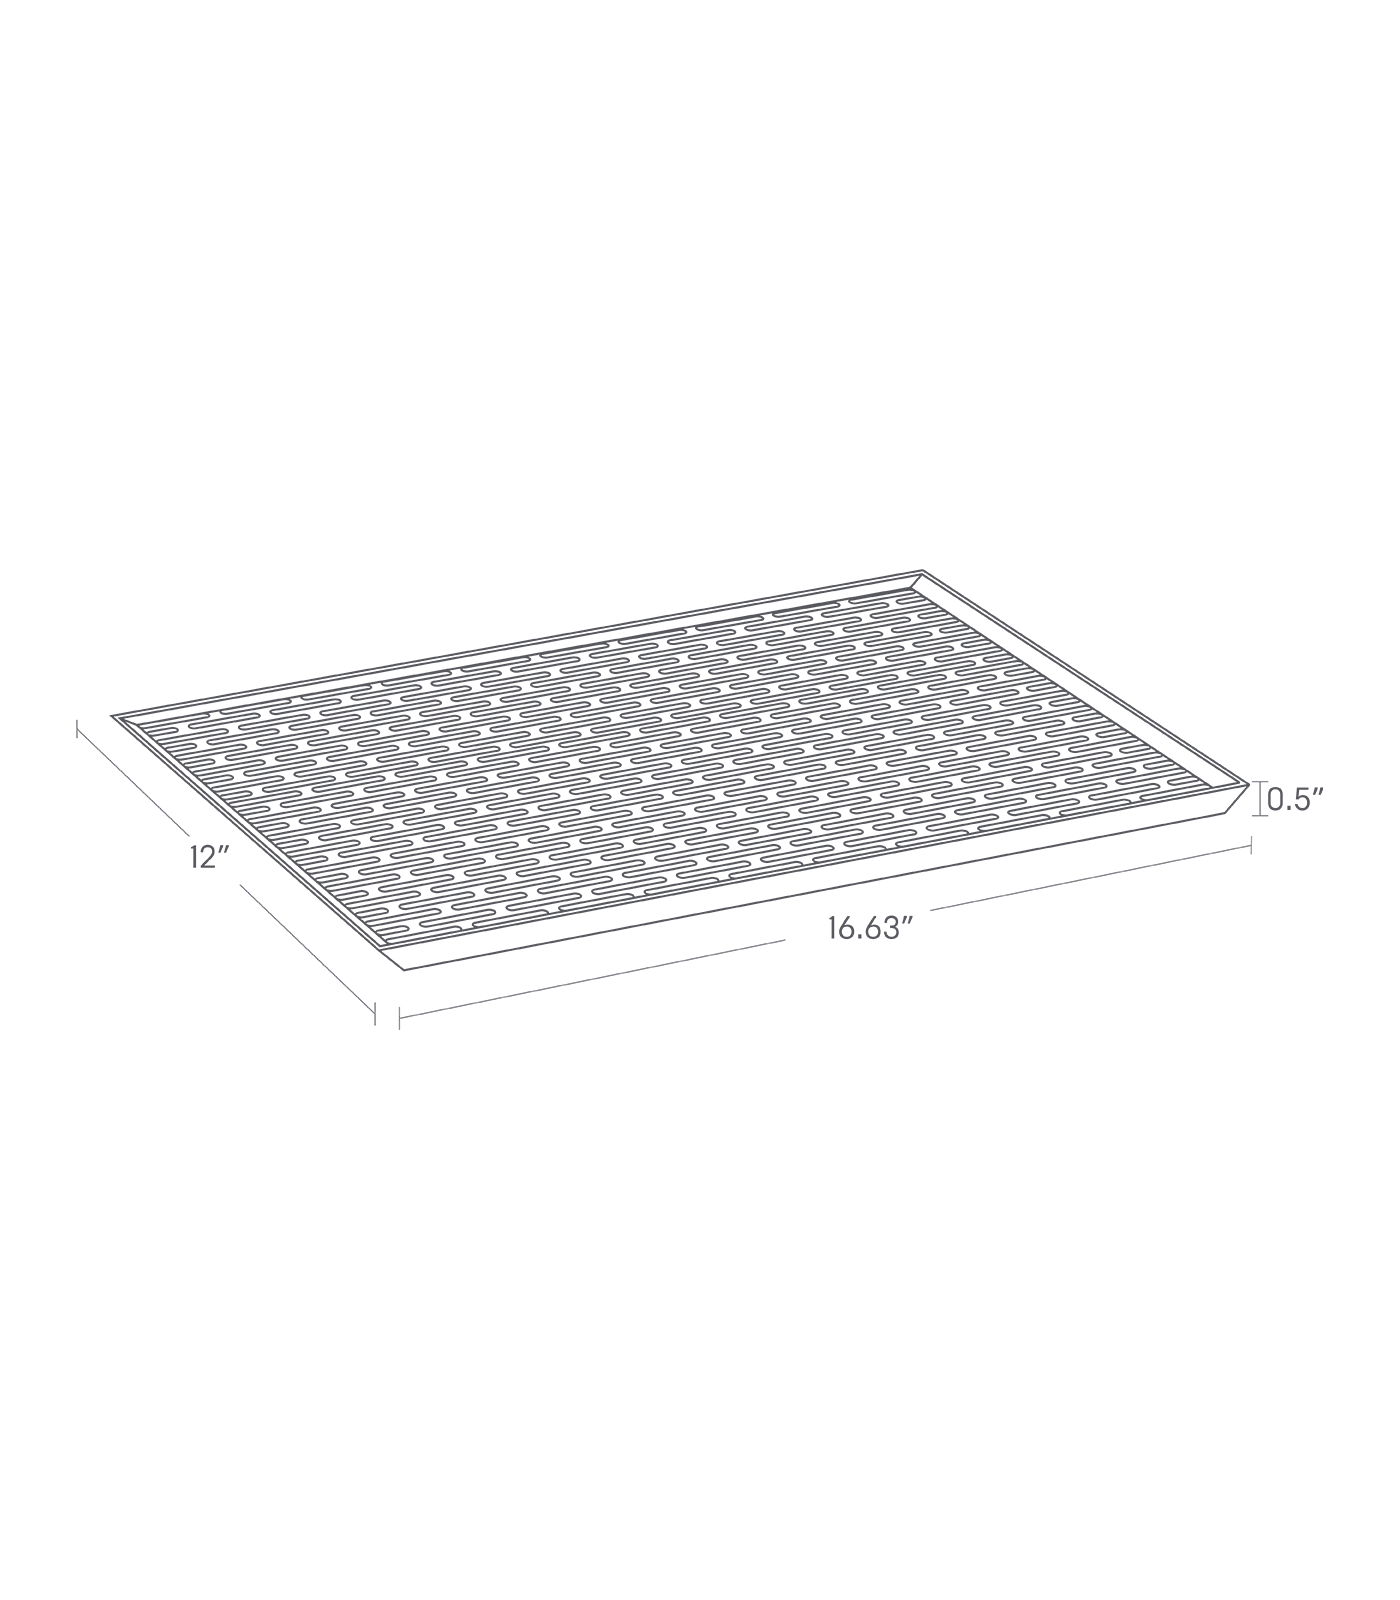 Dimension image for Dish Drainer Tray on a white background including dimensions  L 12.09 x W 16.73 x H 0.59 inches